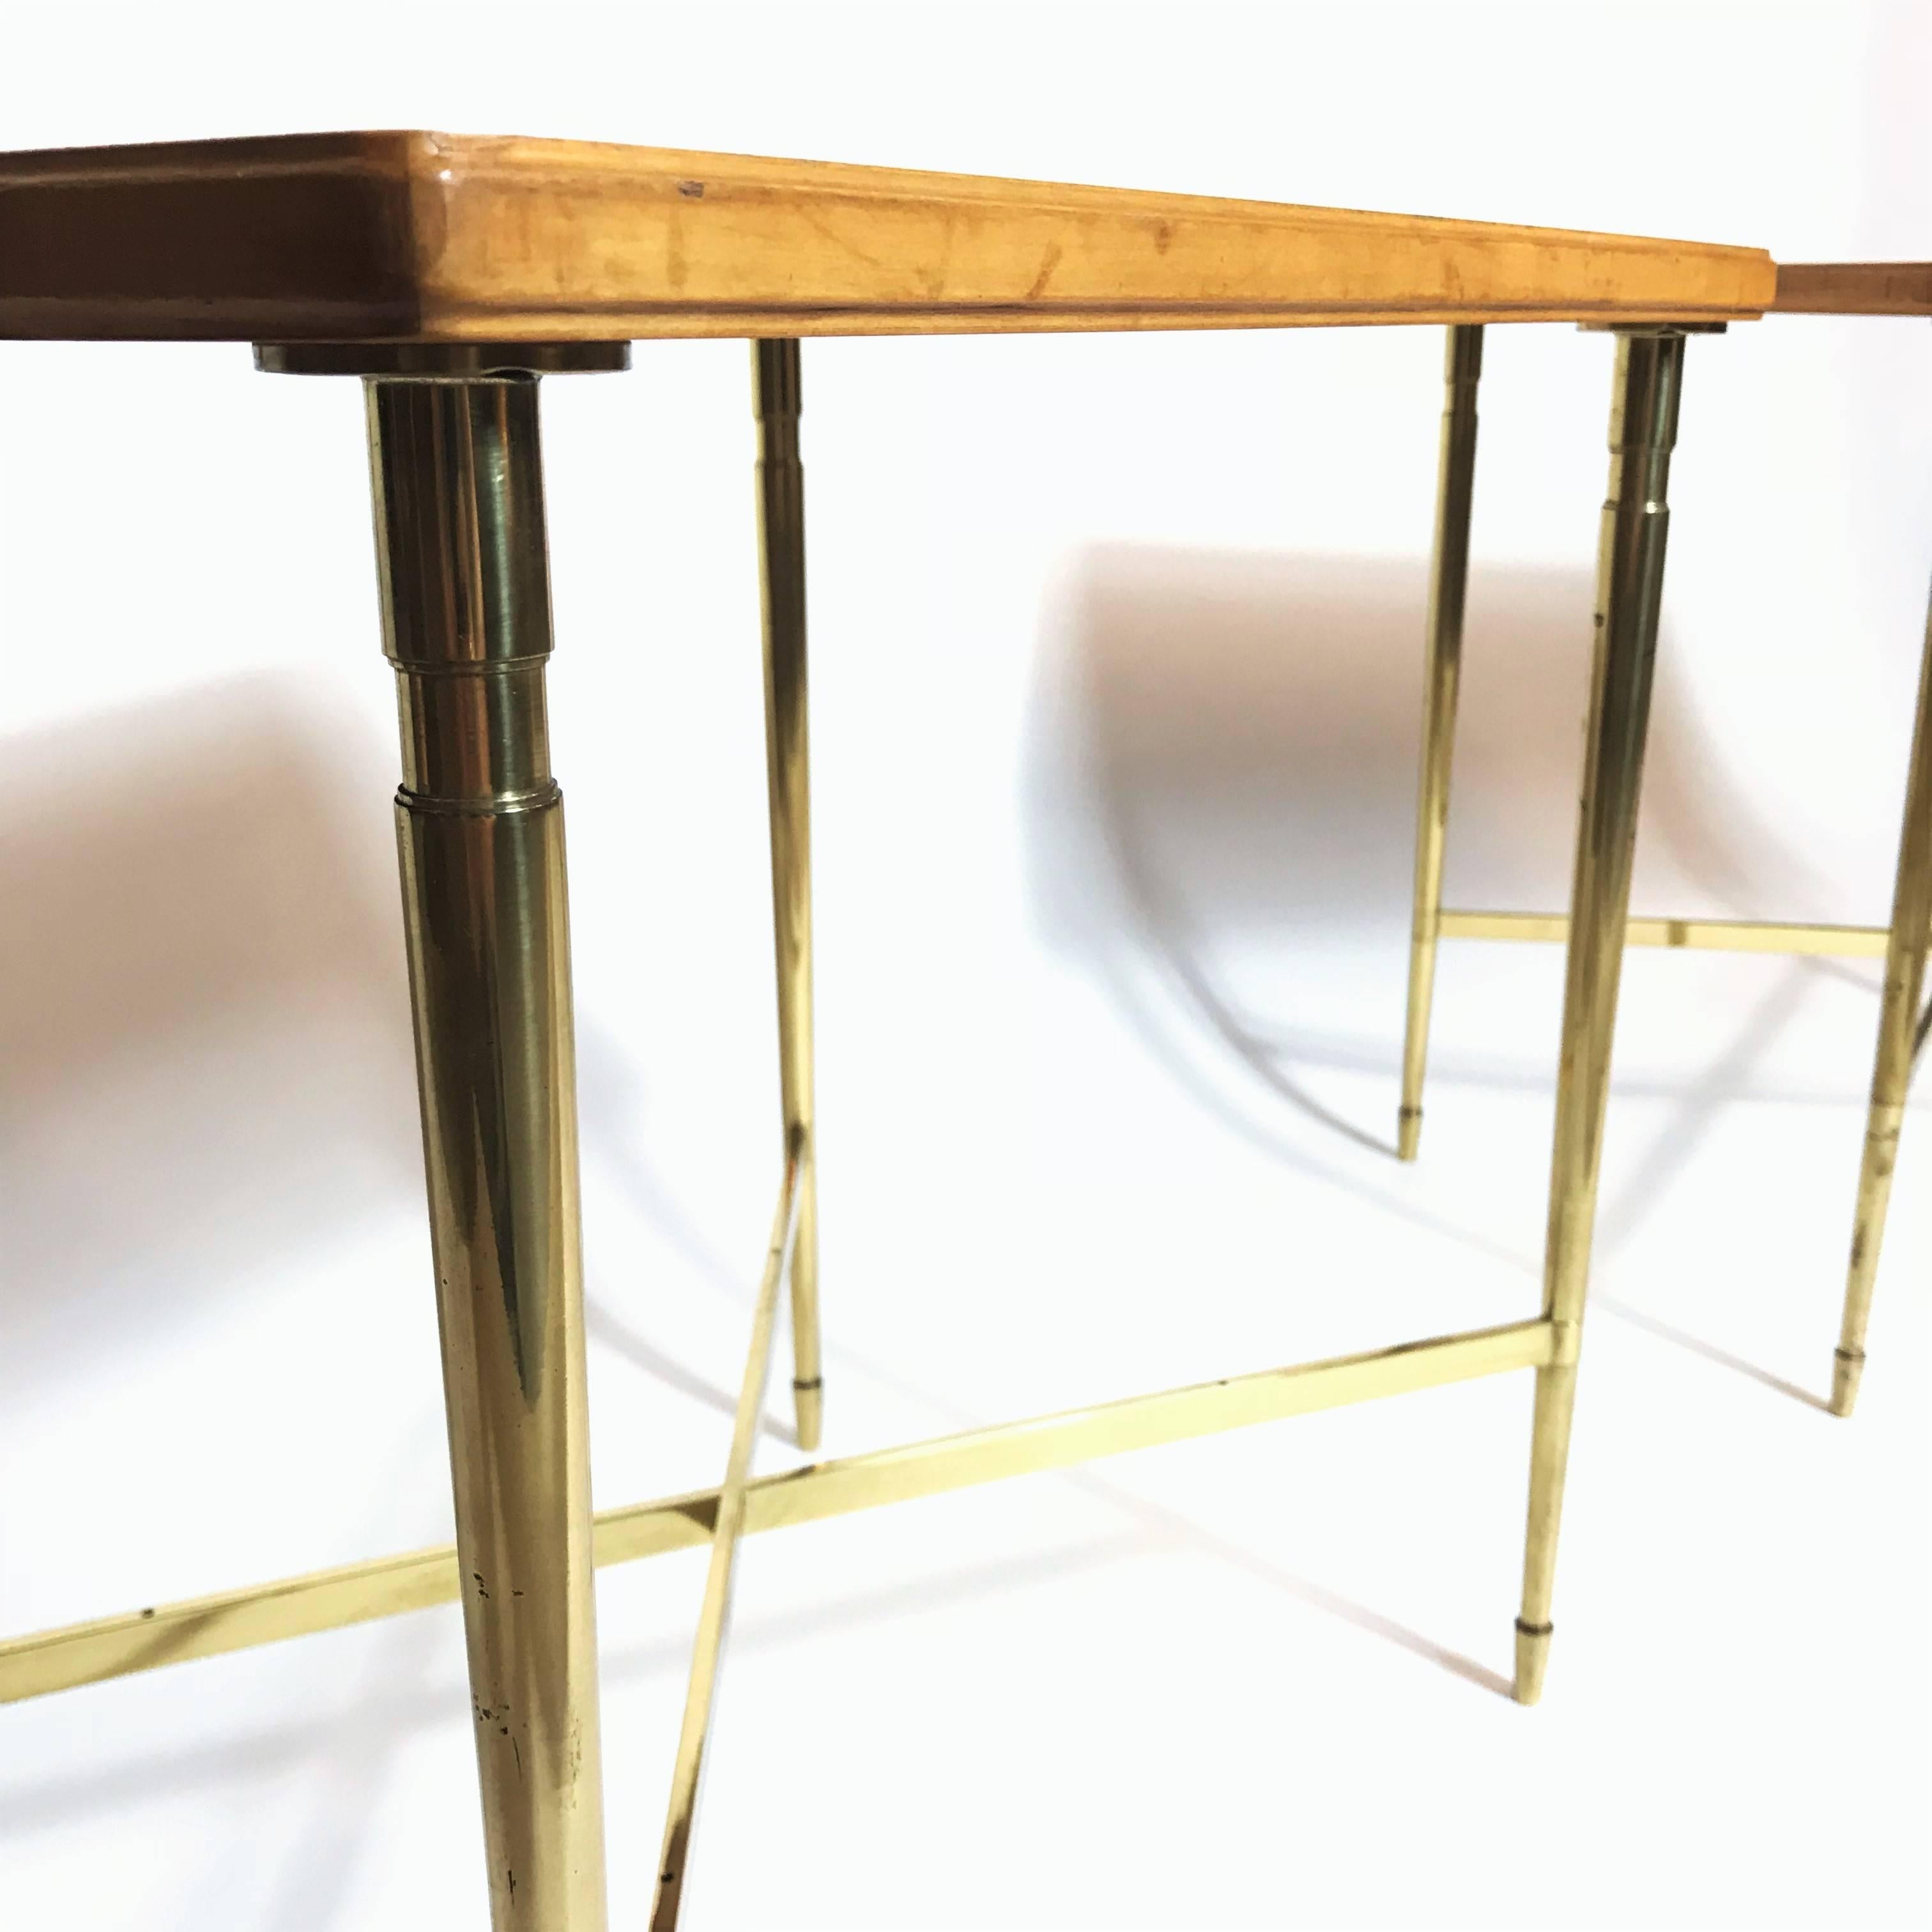 Gilt Art Deco Maison Jansen Style Solid Brass Side or End Tables, 1930s, France